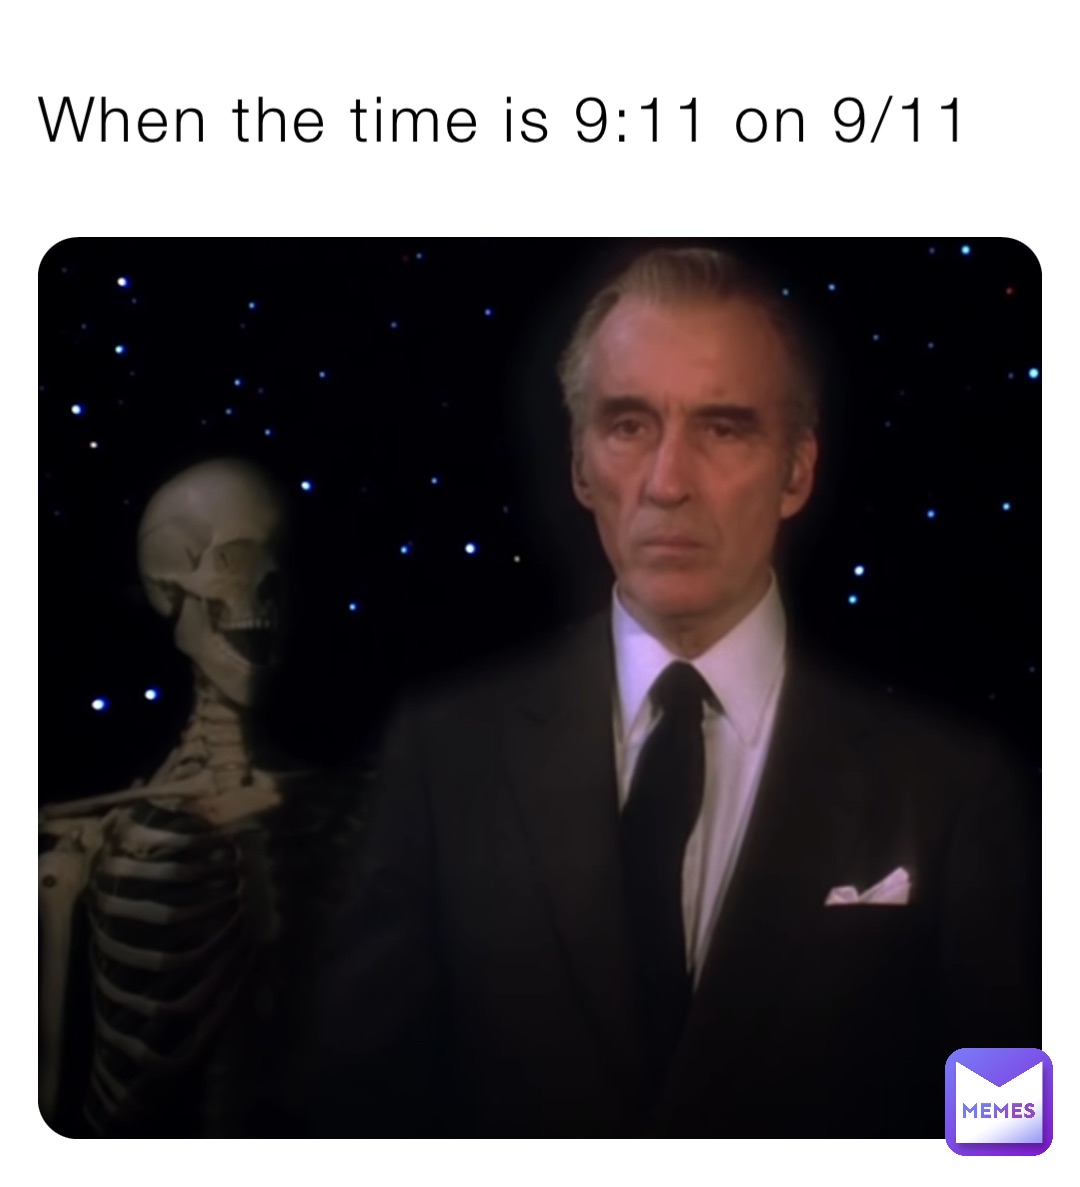 When the time is 9:11 on 9/11